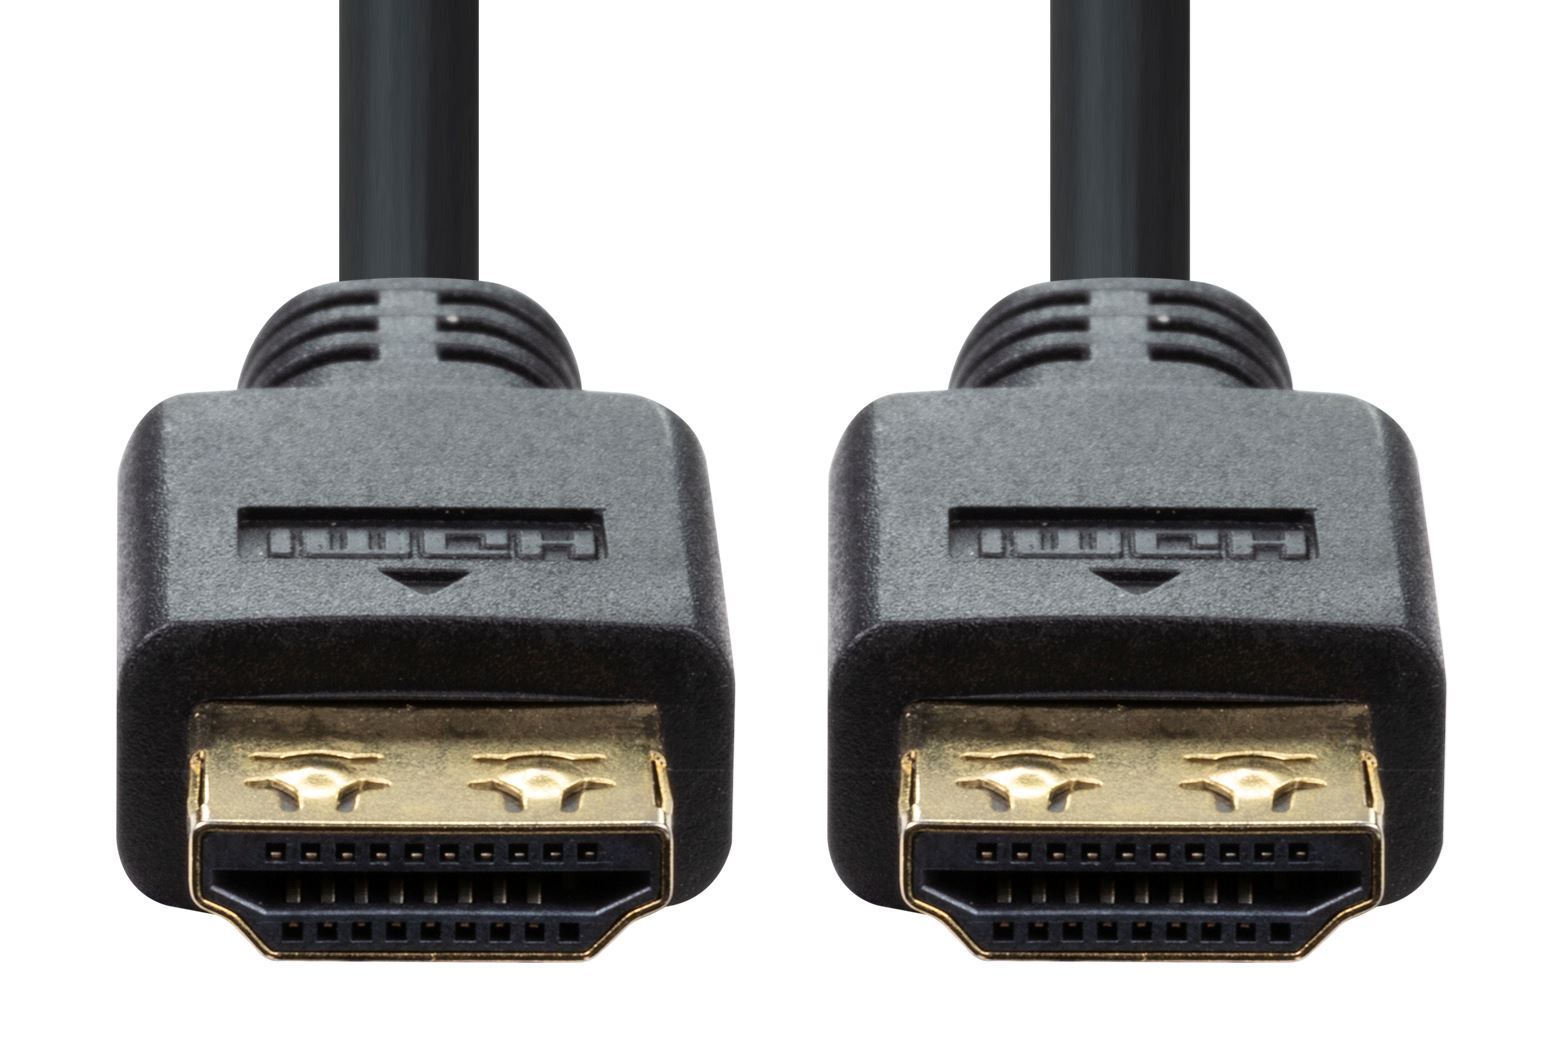 DYNAMIX_15m_HDMI_High_Speed_Flexi_Lock_Cable_with_Ethernet._Max_Res:_4K2K@30Hz._Supports_ARC_and_3D._Ferrite_Core_at_each_end_of_cable. 727